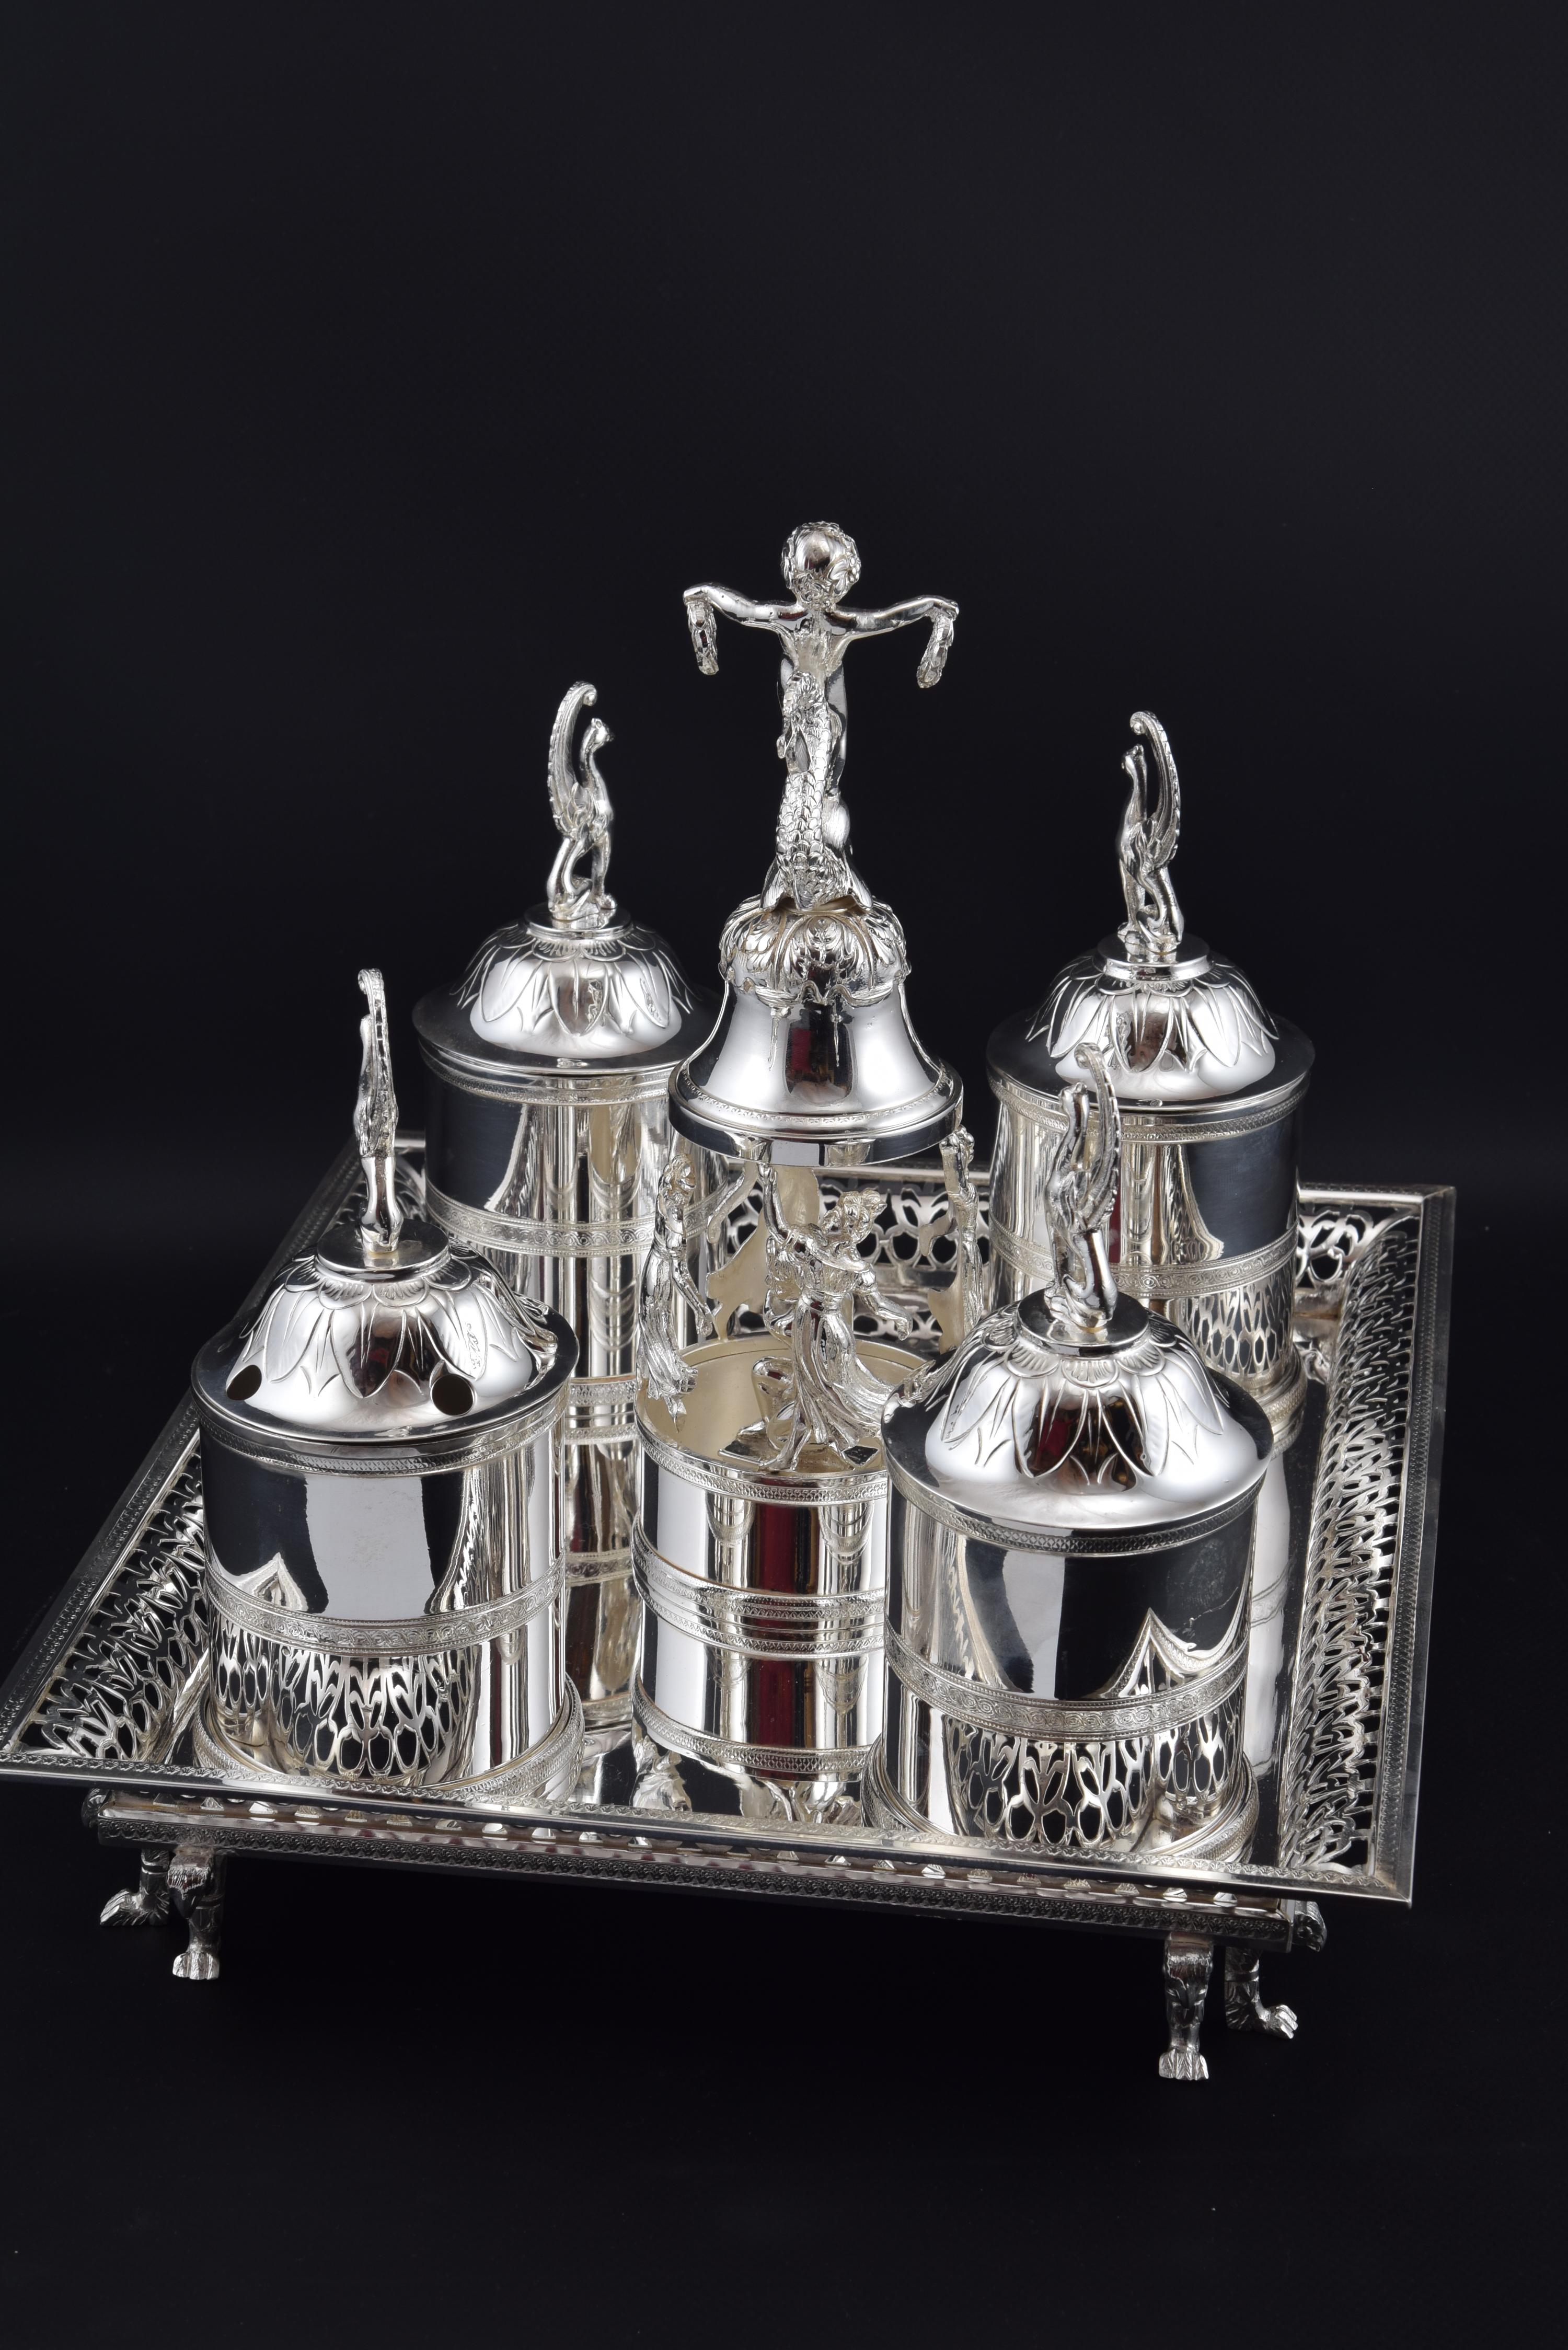 19th Century Silver-Plated Writing Set, 19th-20th Century